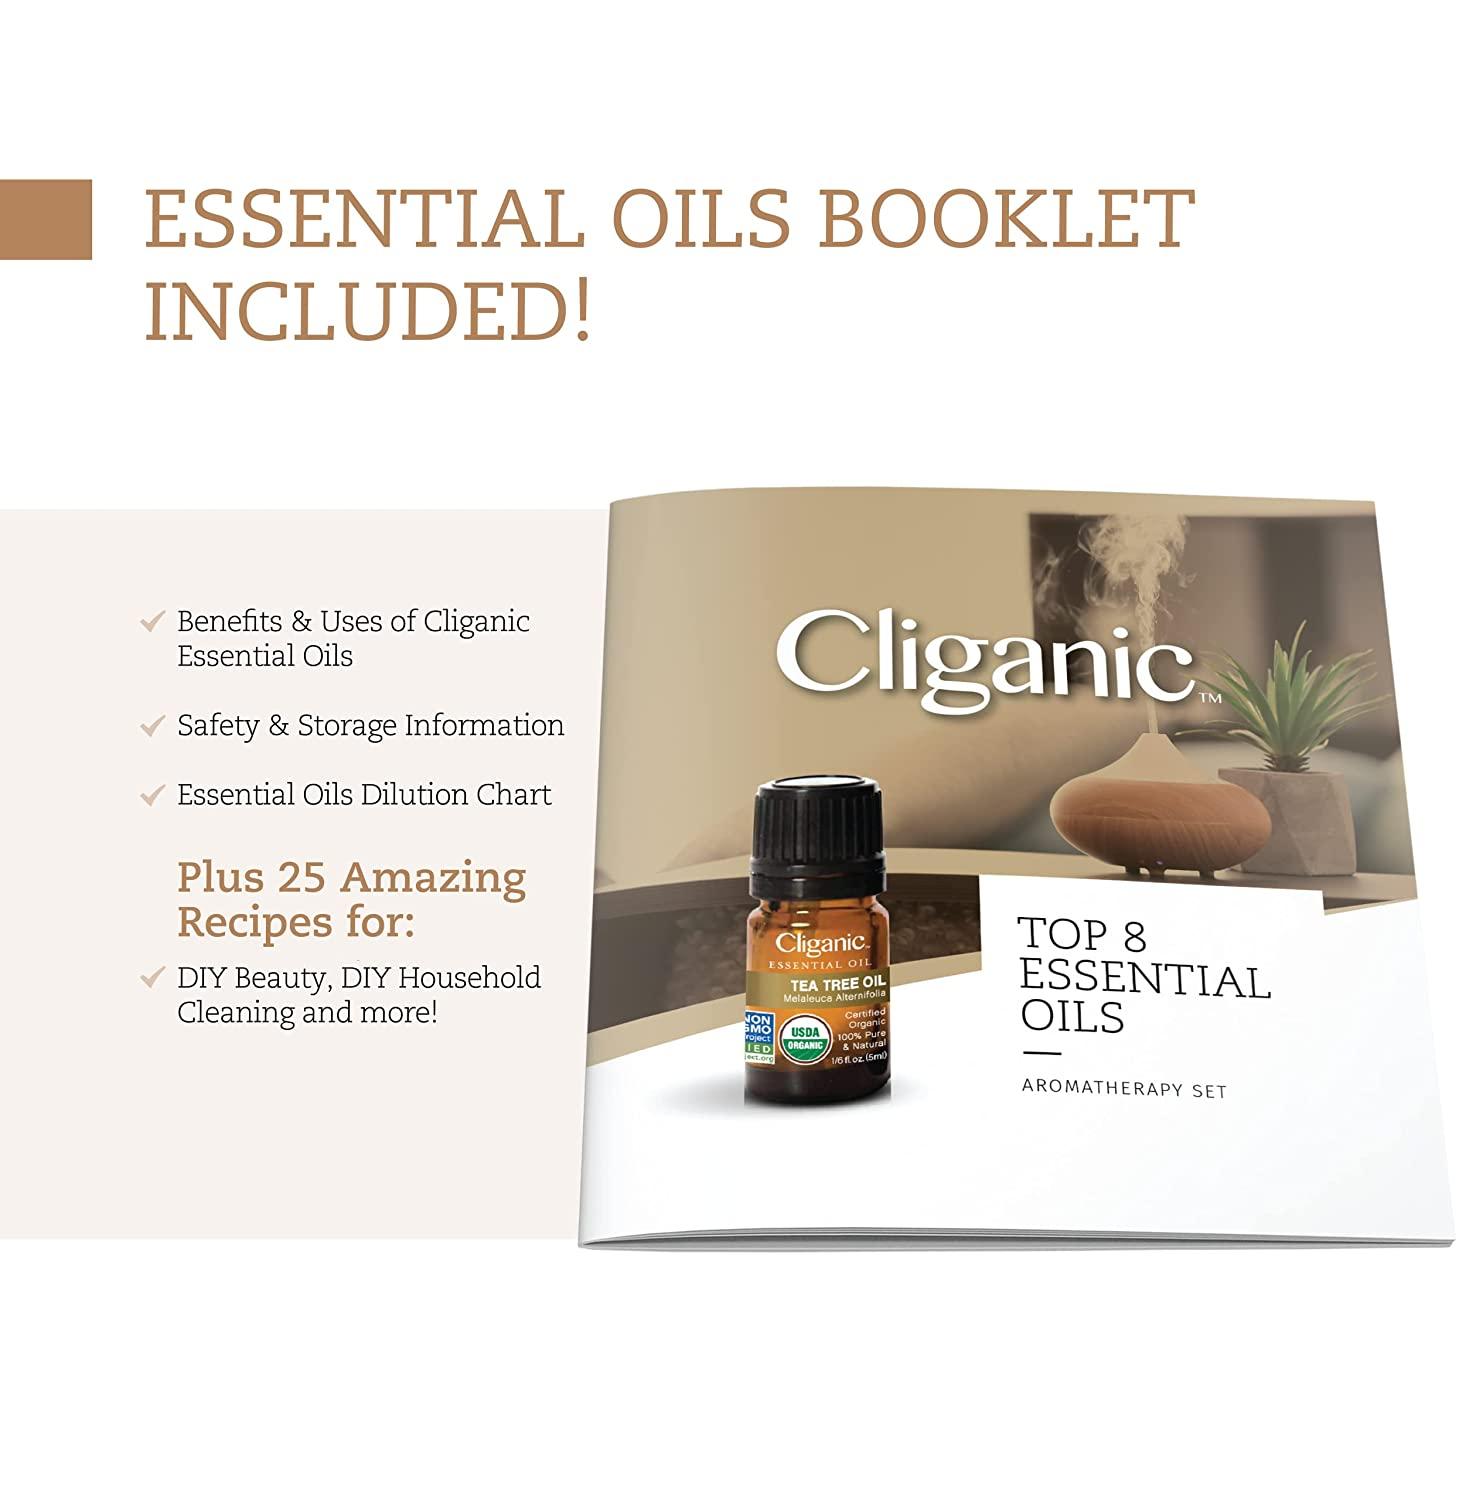 Cliganic Organic Aromatherapy Essential Oils Set (Top 5), Other